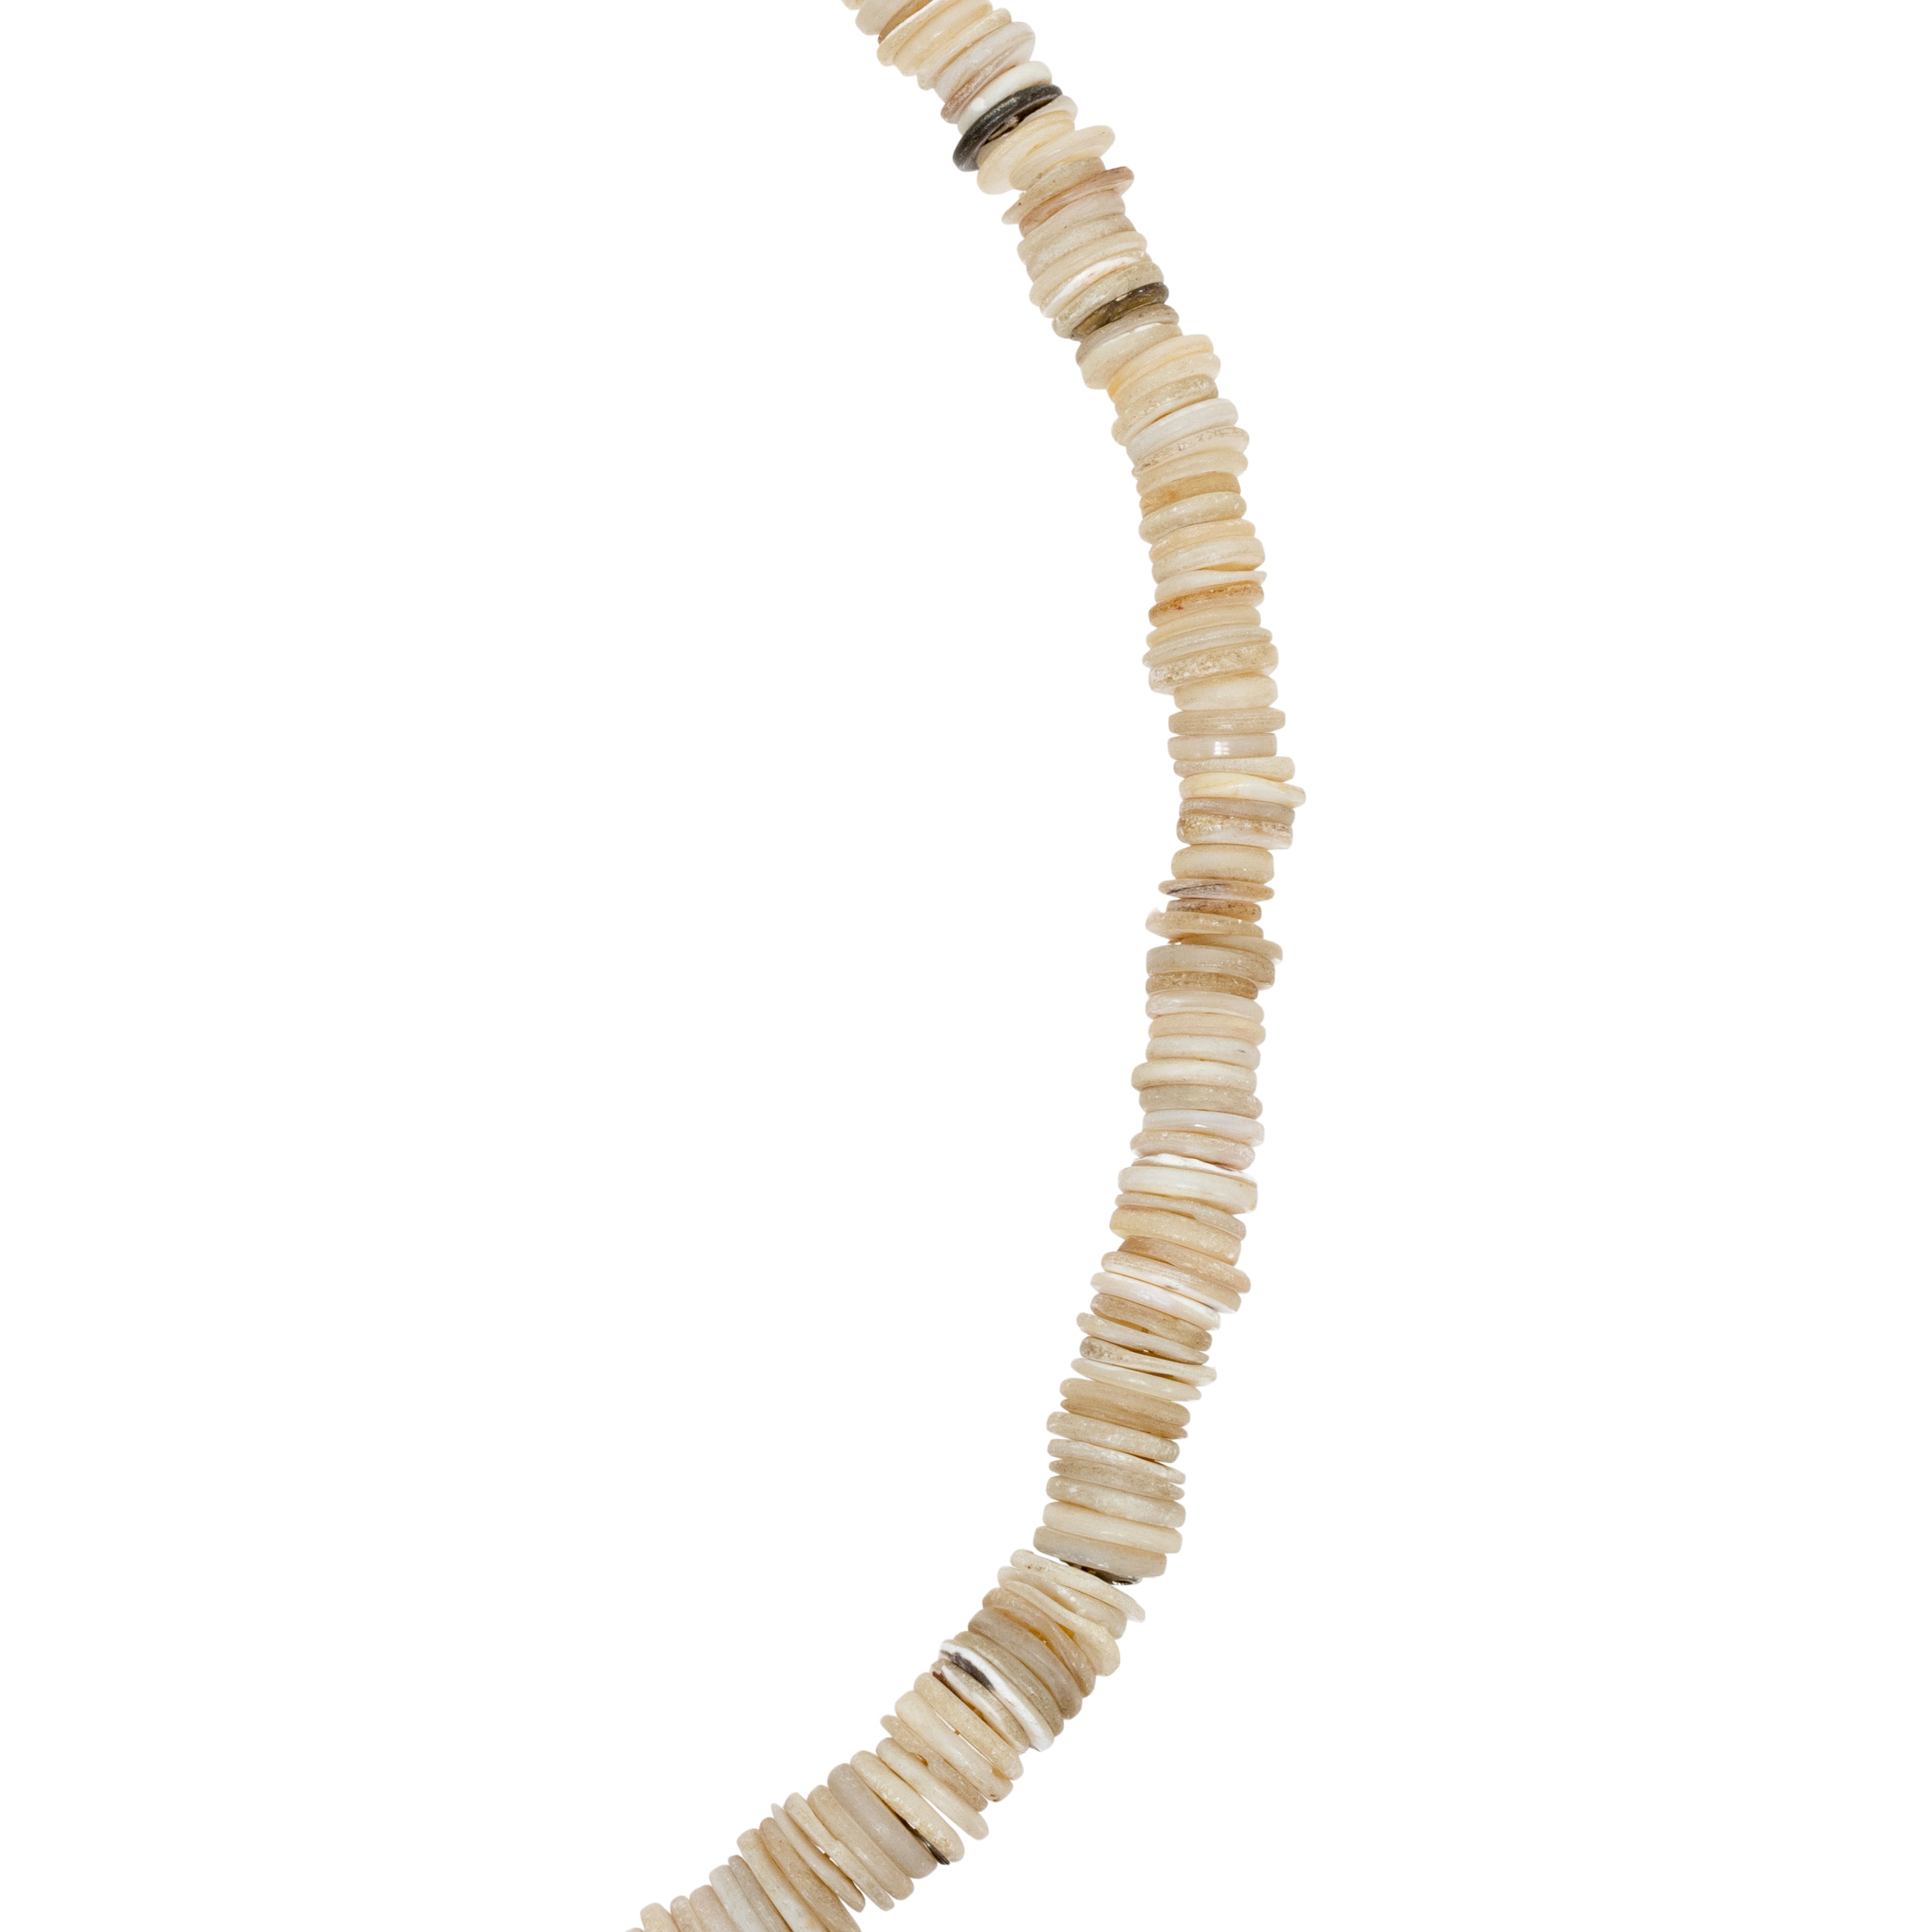 Early Native Mother of Pearl Necklace